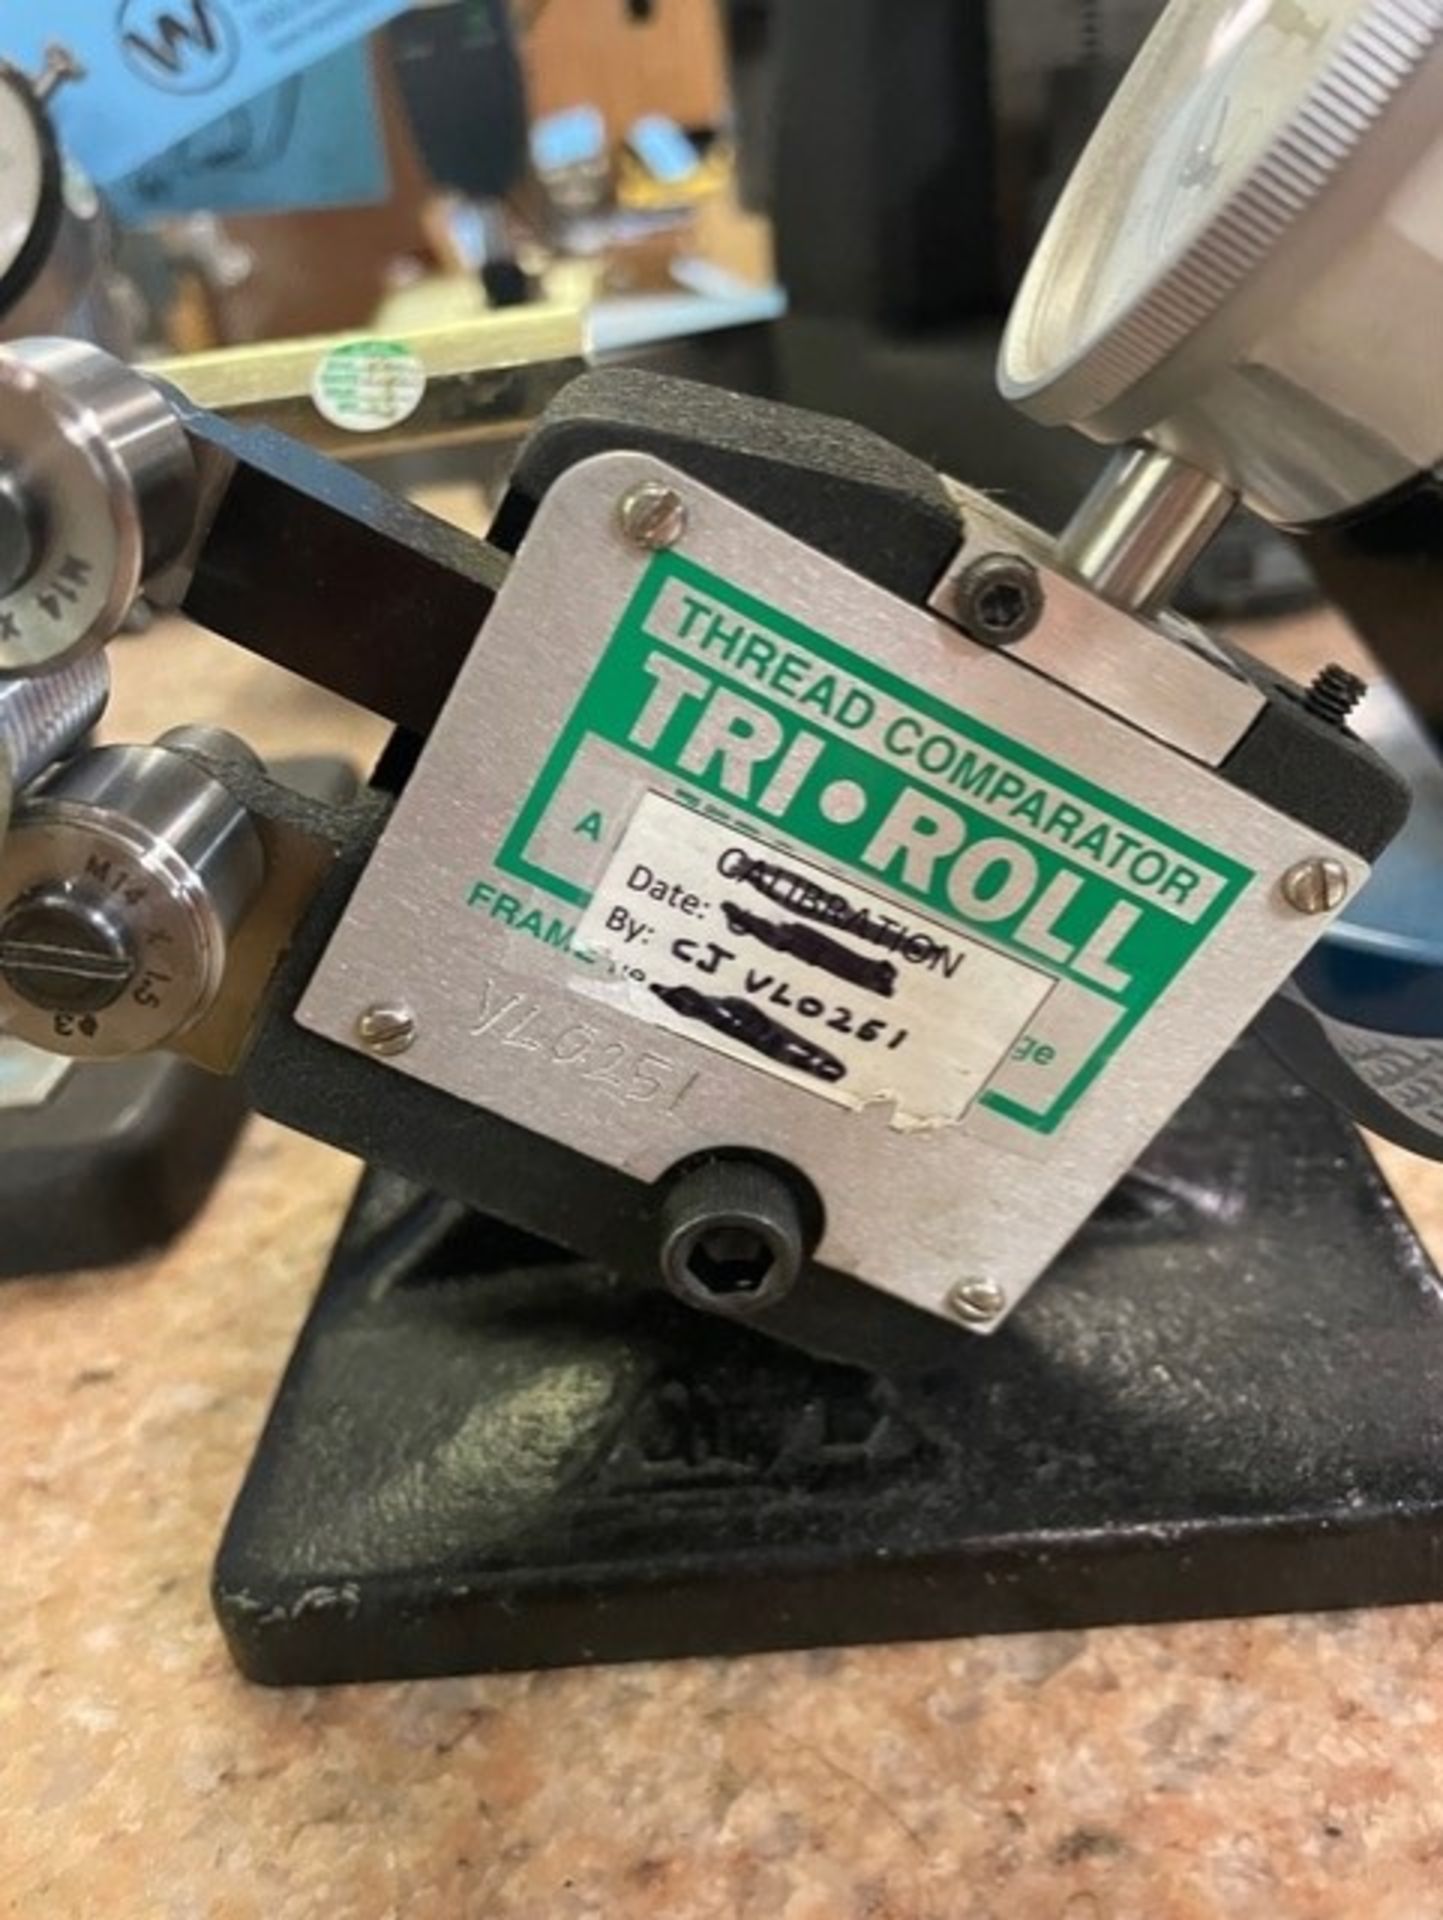 Tri-Roll Thread Comparator with No Name Dial Force Indicator Gauge - Image 4 of 4